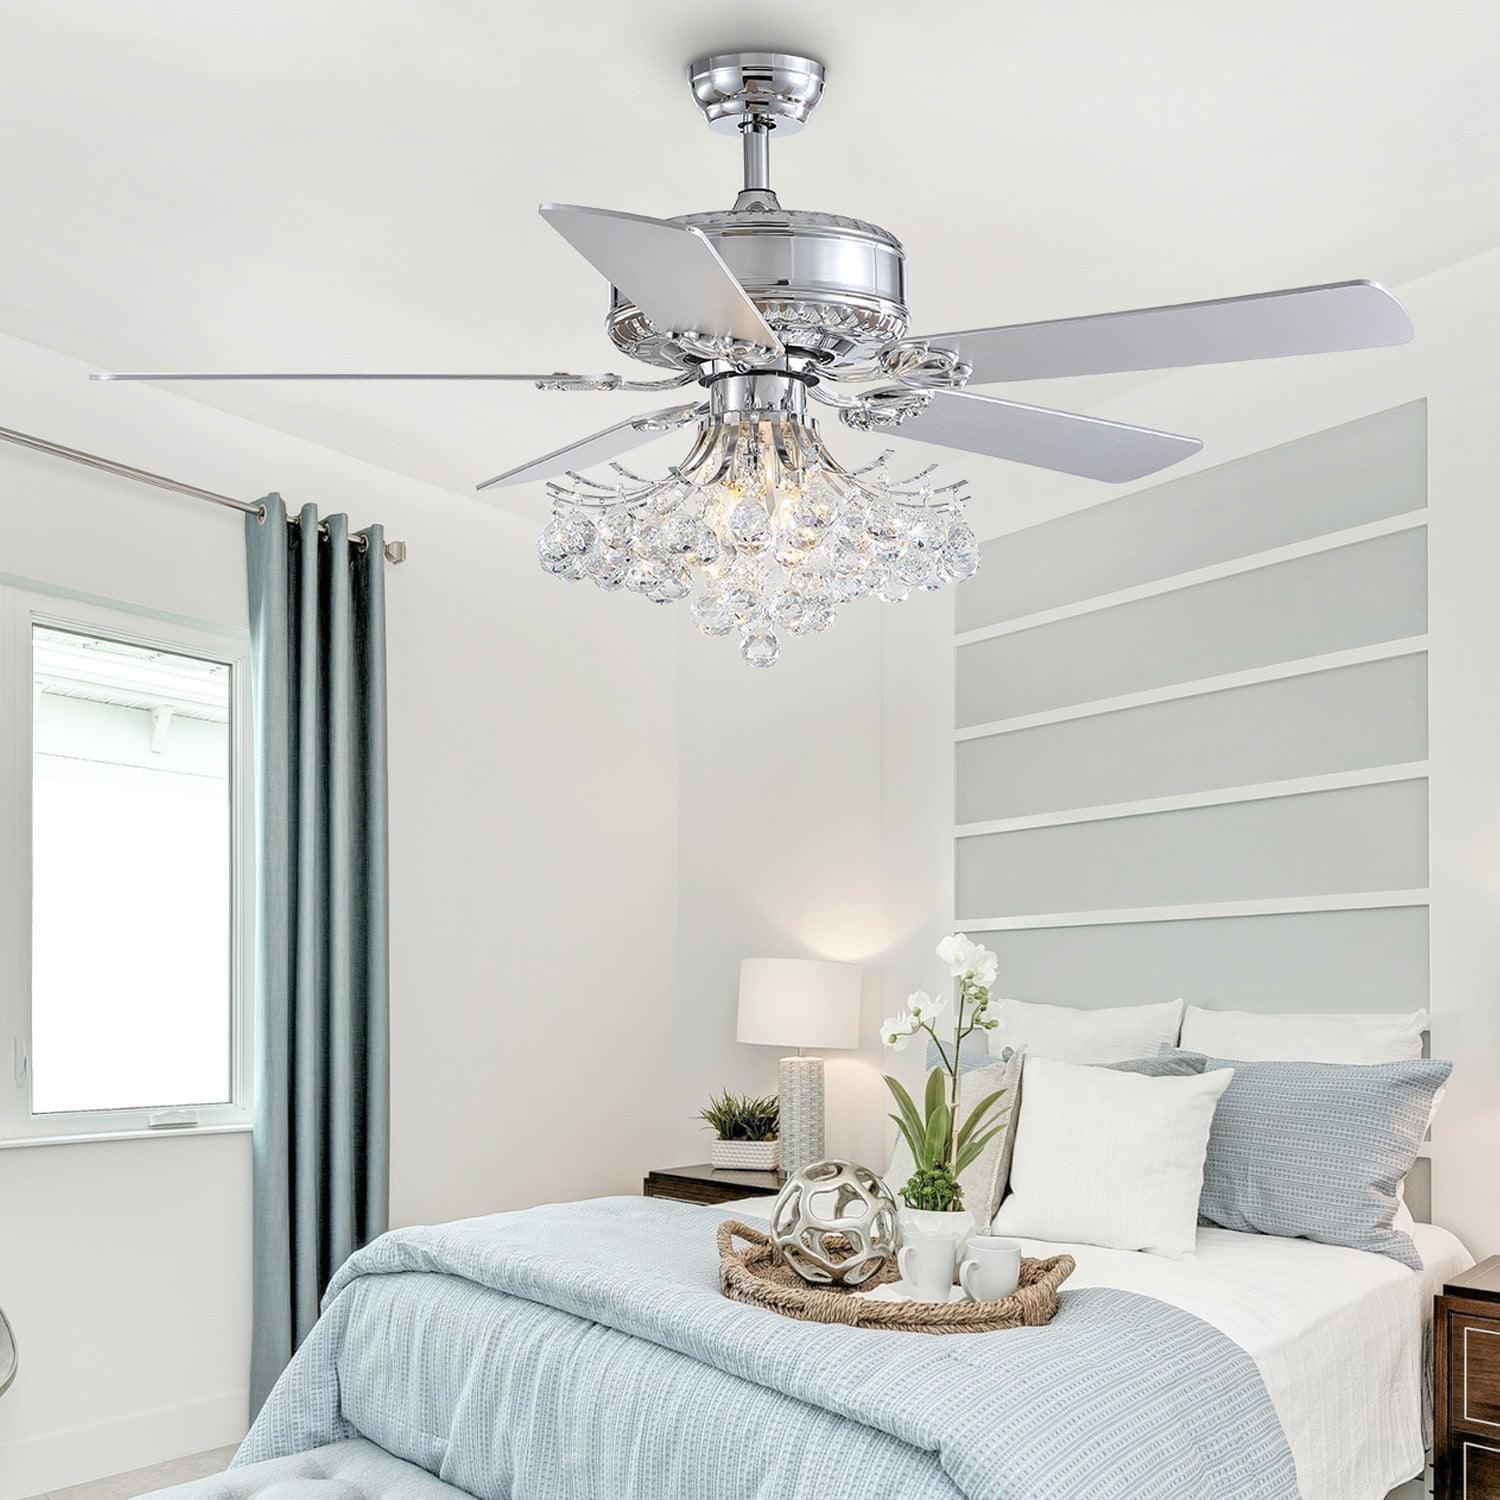 5 - Blade Raindrop Crystal Ball Ceiling Fan with Remote Control